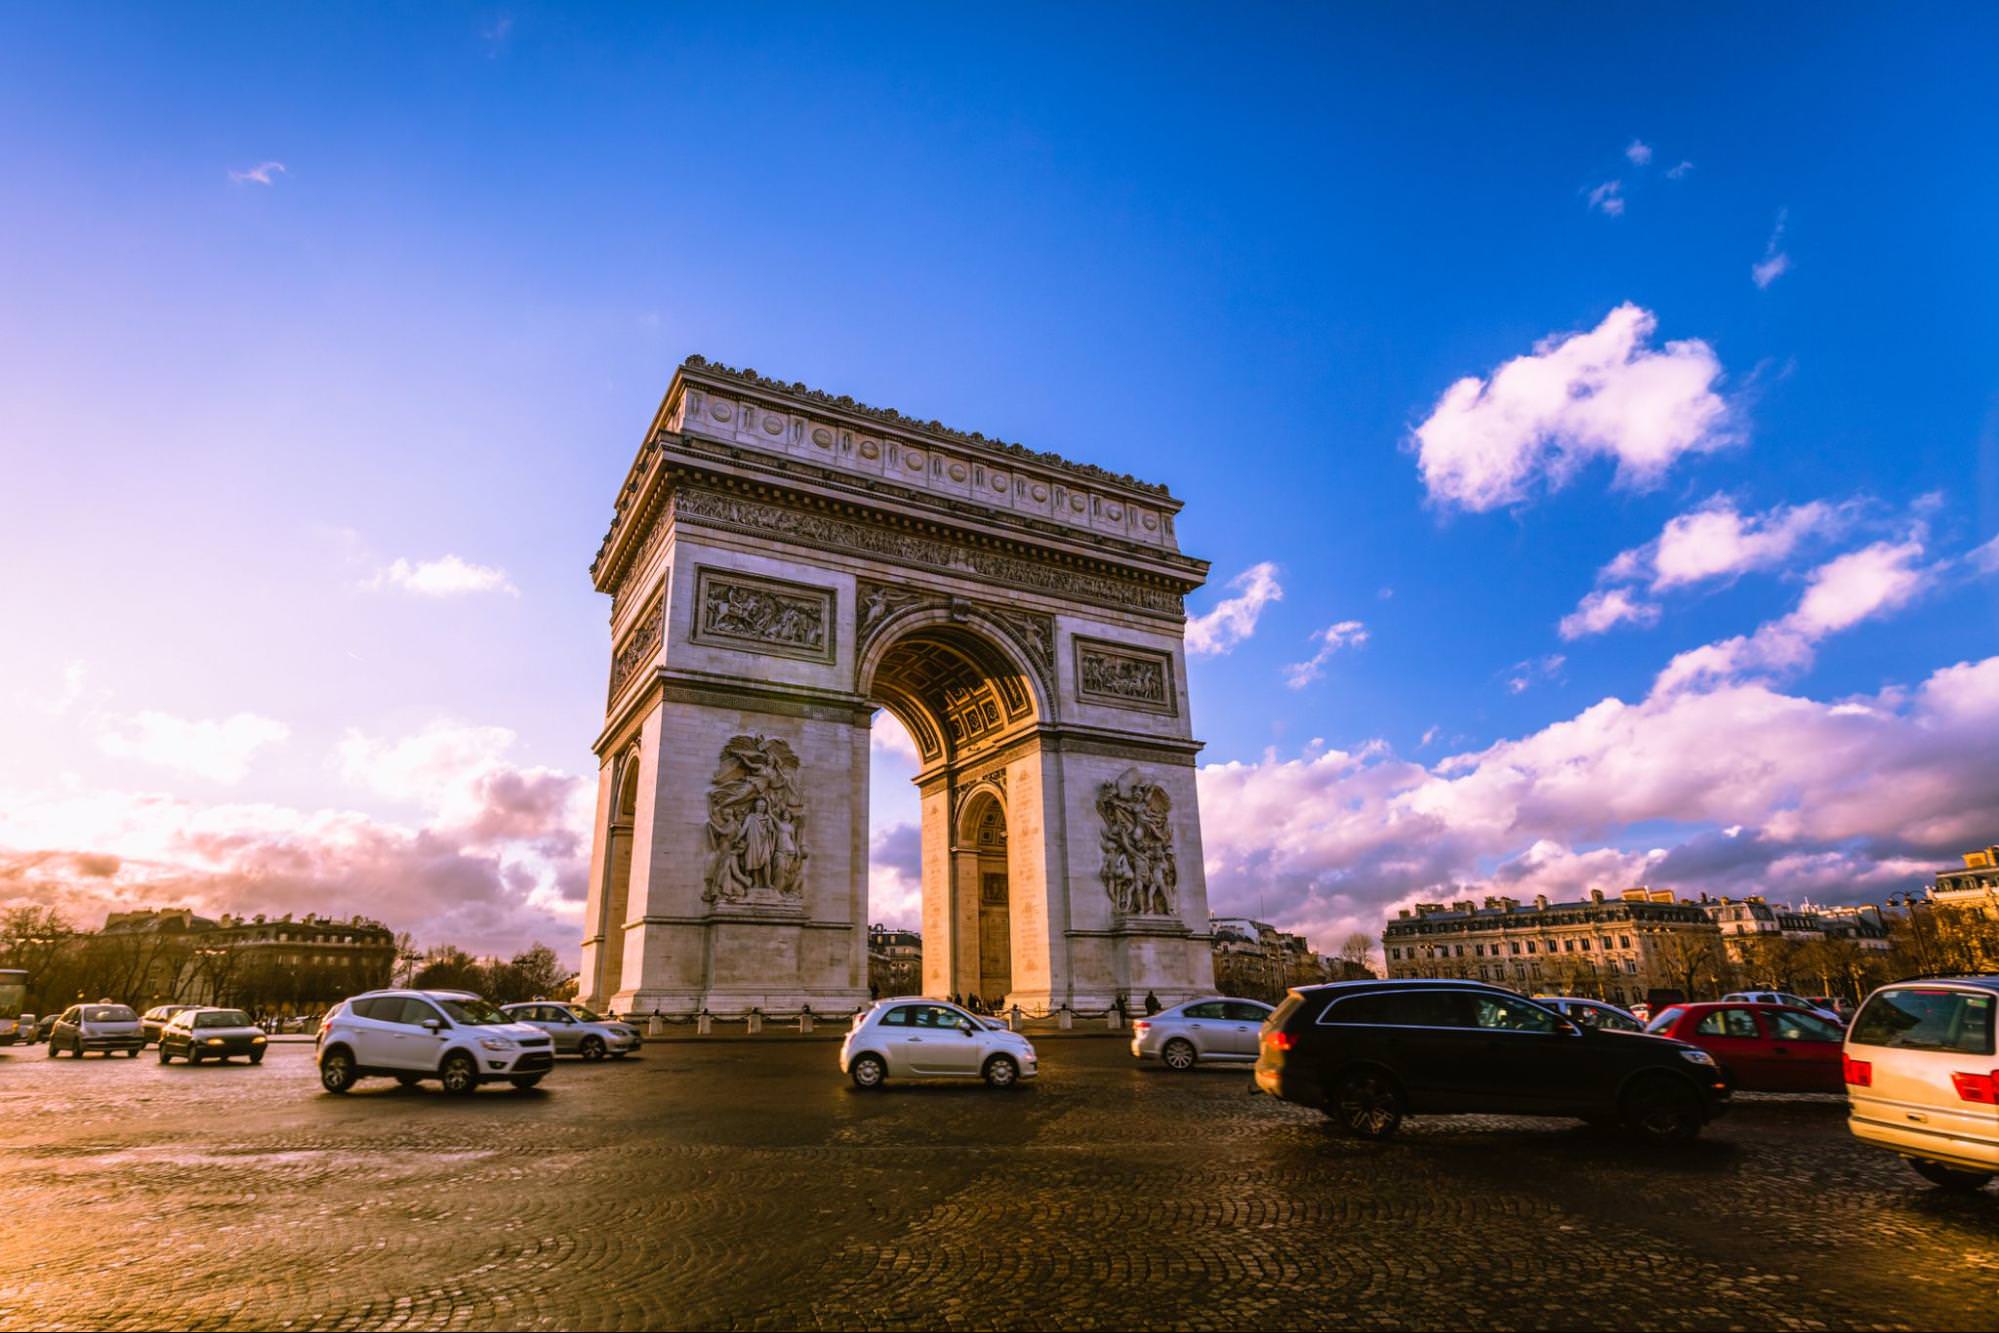 The famous Arc de Triomphe in Paris, France at sunset with a car traffic around it.